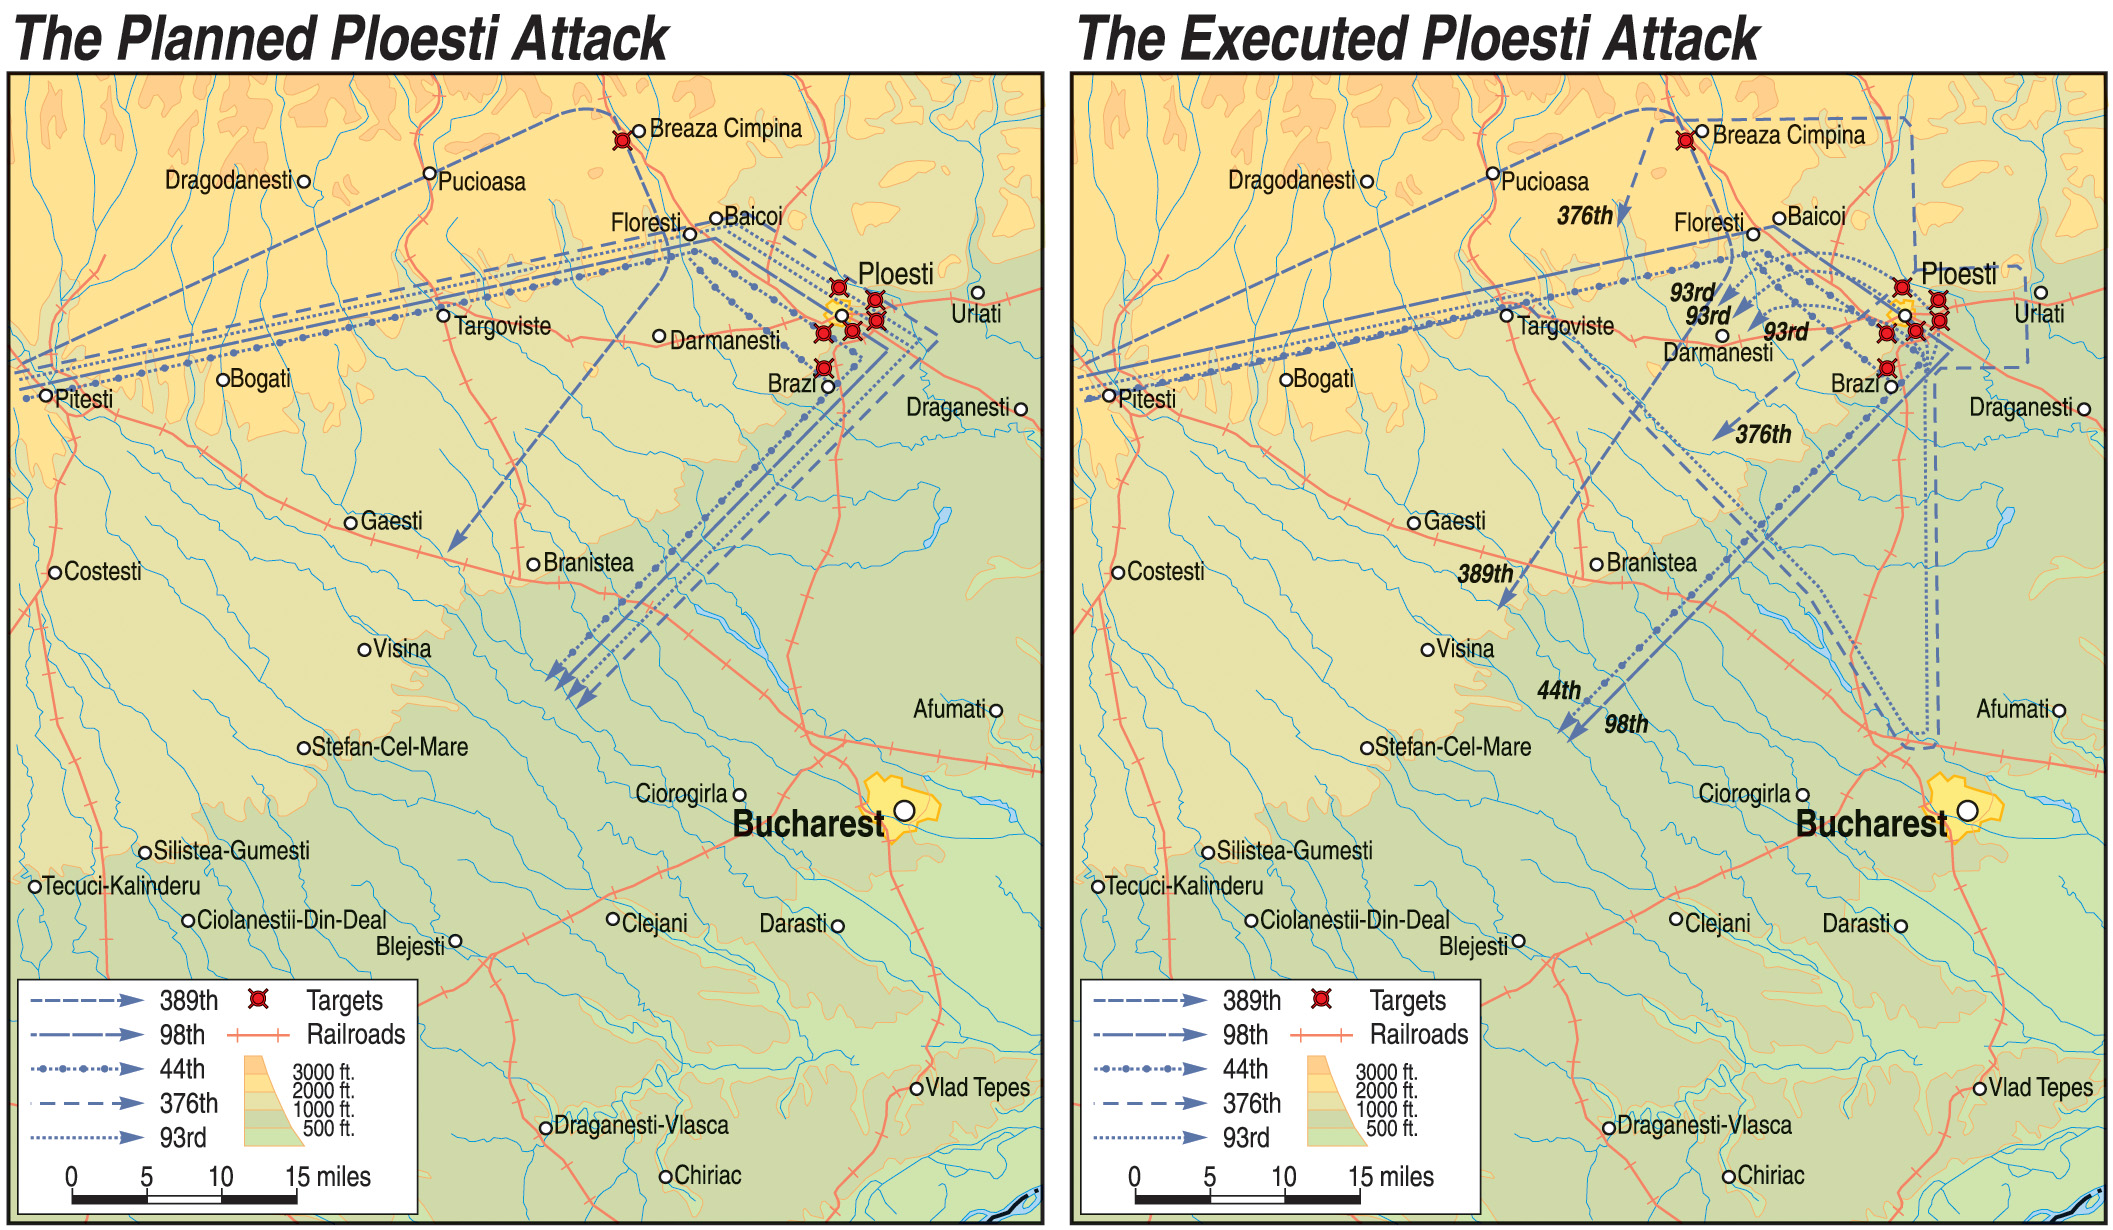 The routes of approach to the target at Ploesti and the return flights of the five Fifteenth Air Force bomb groups are detailed in the two maps. The 93rd and 376th missed the final checkpoint of Floresti, turning instead at Targoviste. 